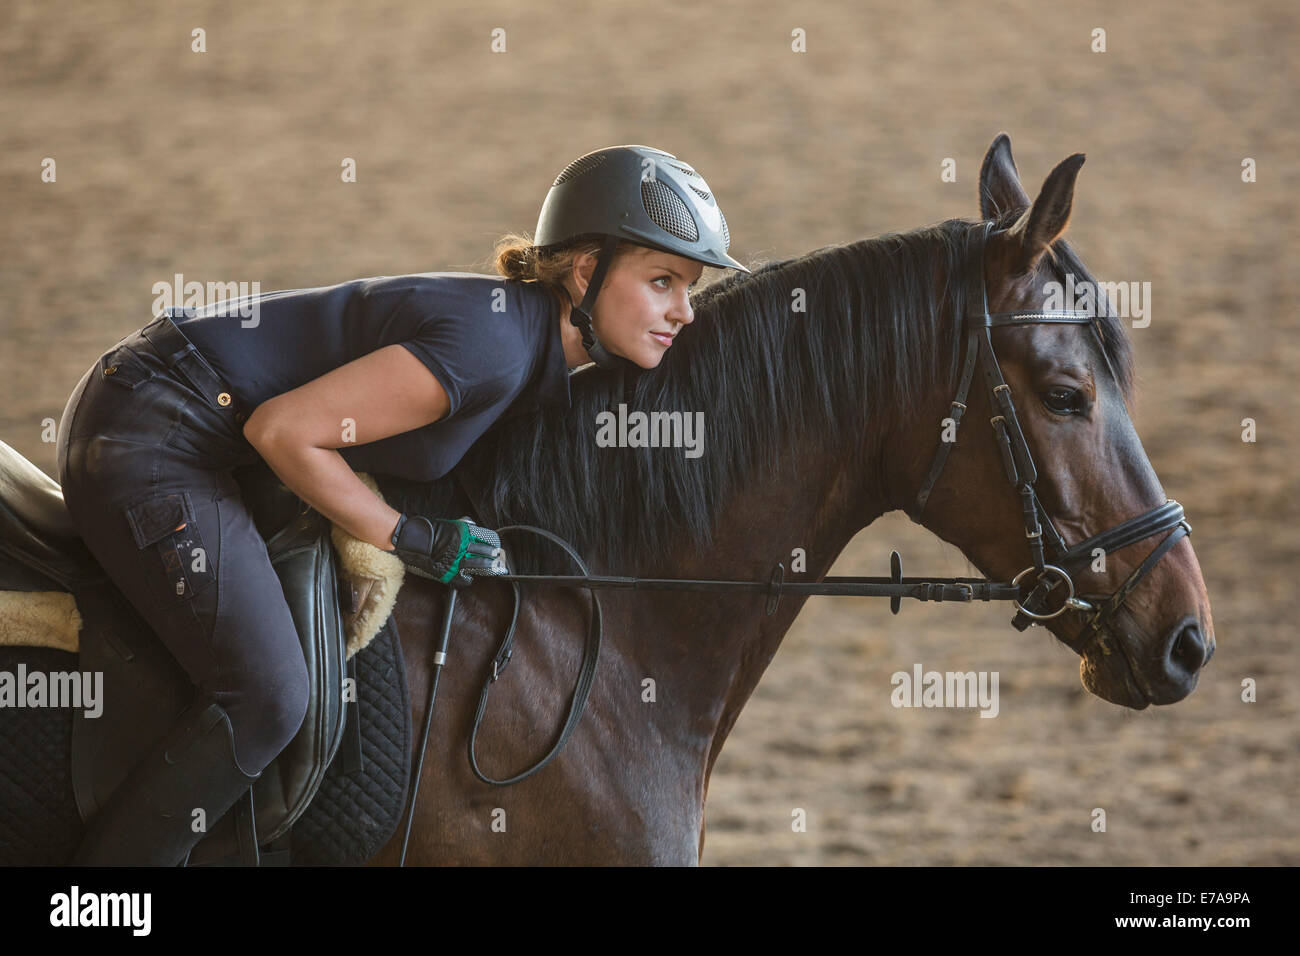 Side view of woman riding horse at ranch Stock Photo